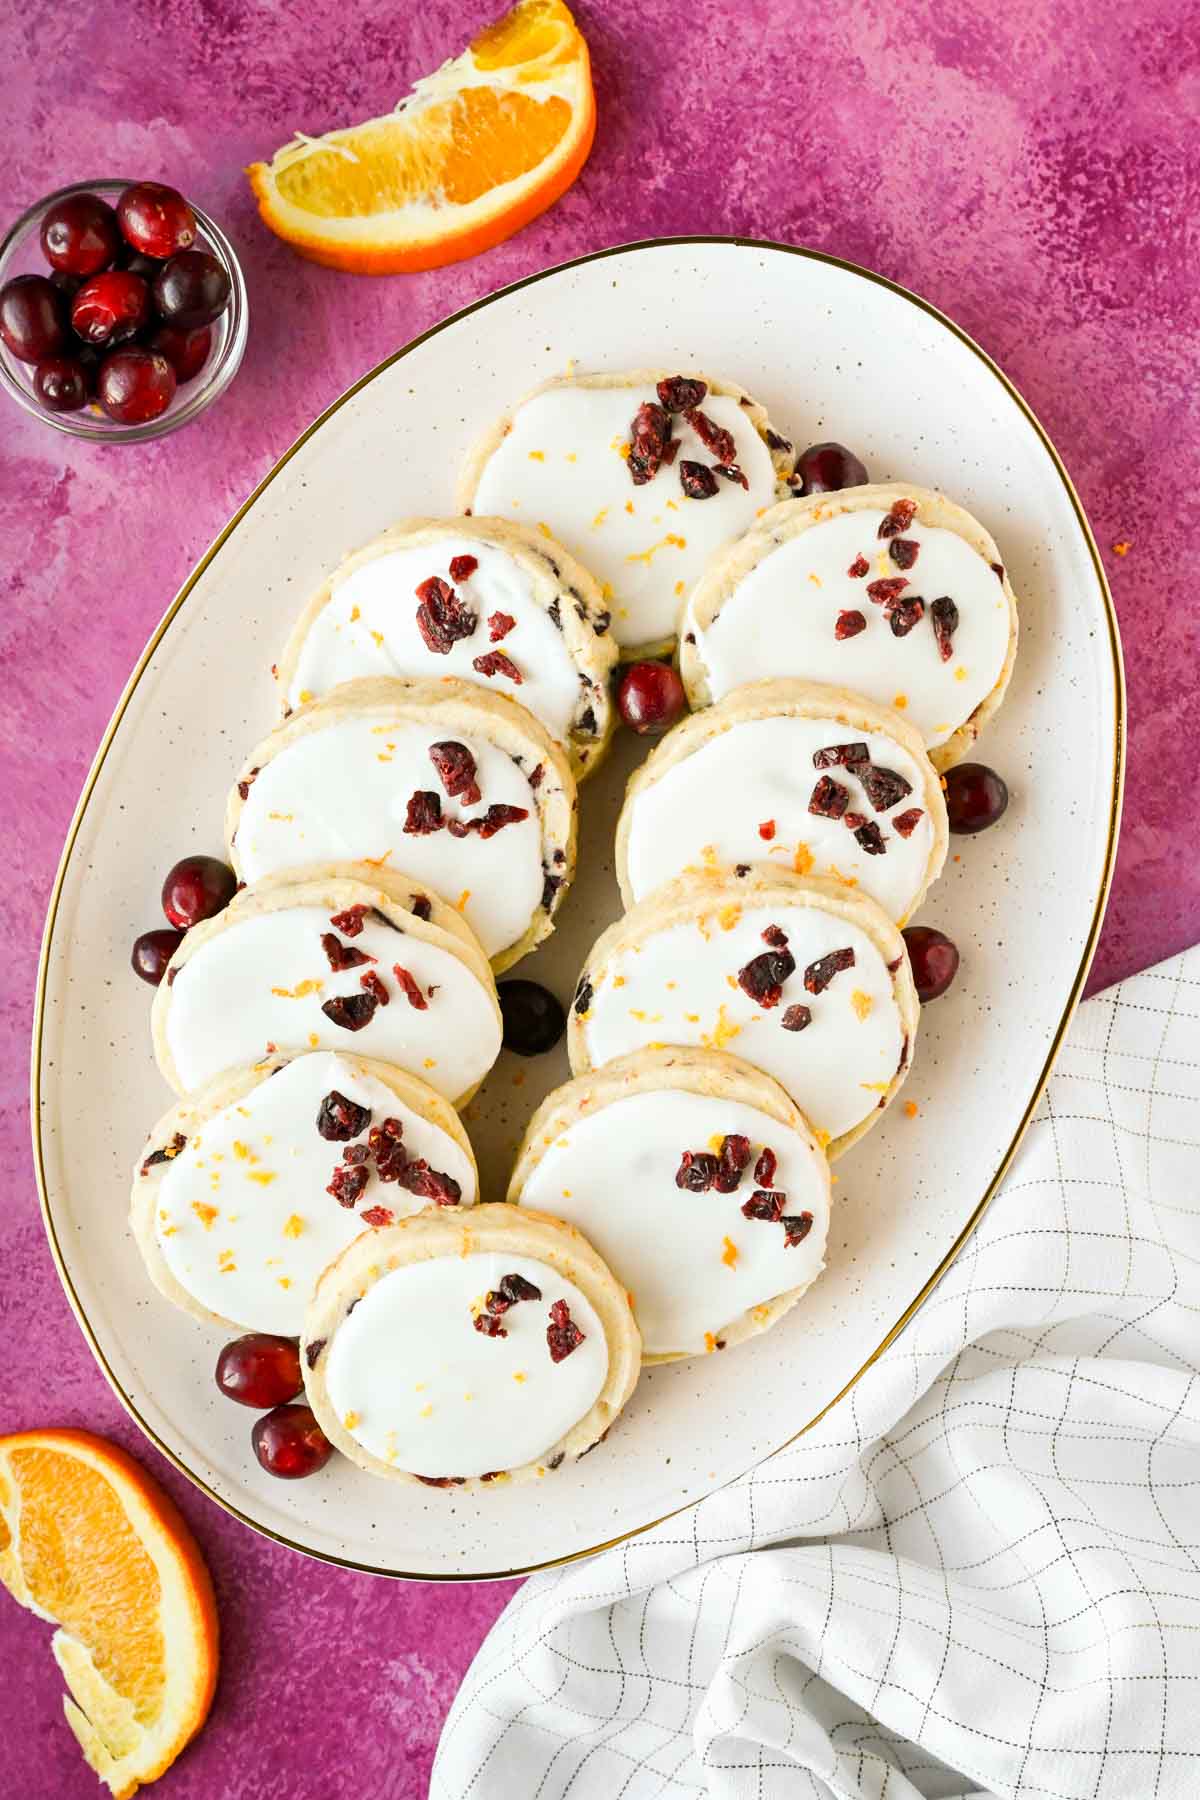 cranberry orange shortbread cookies with white frosting on speckled serving plate.